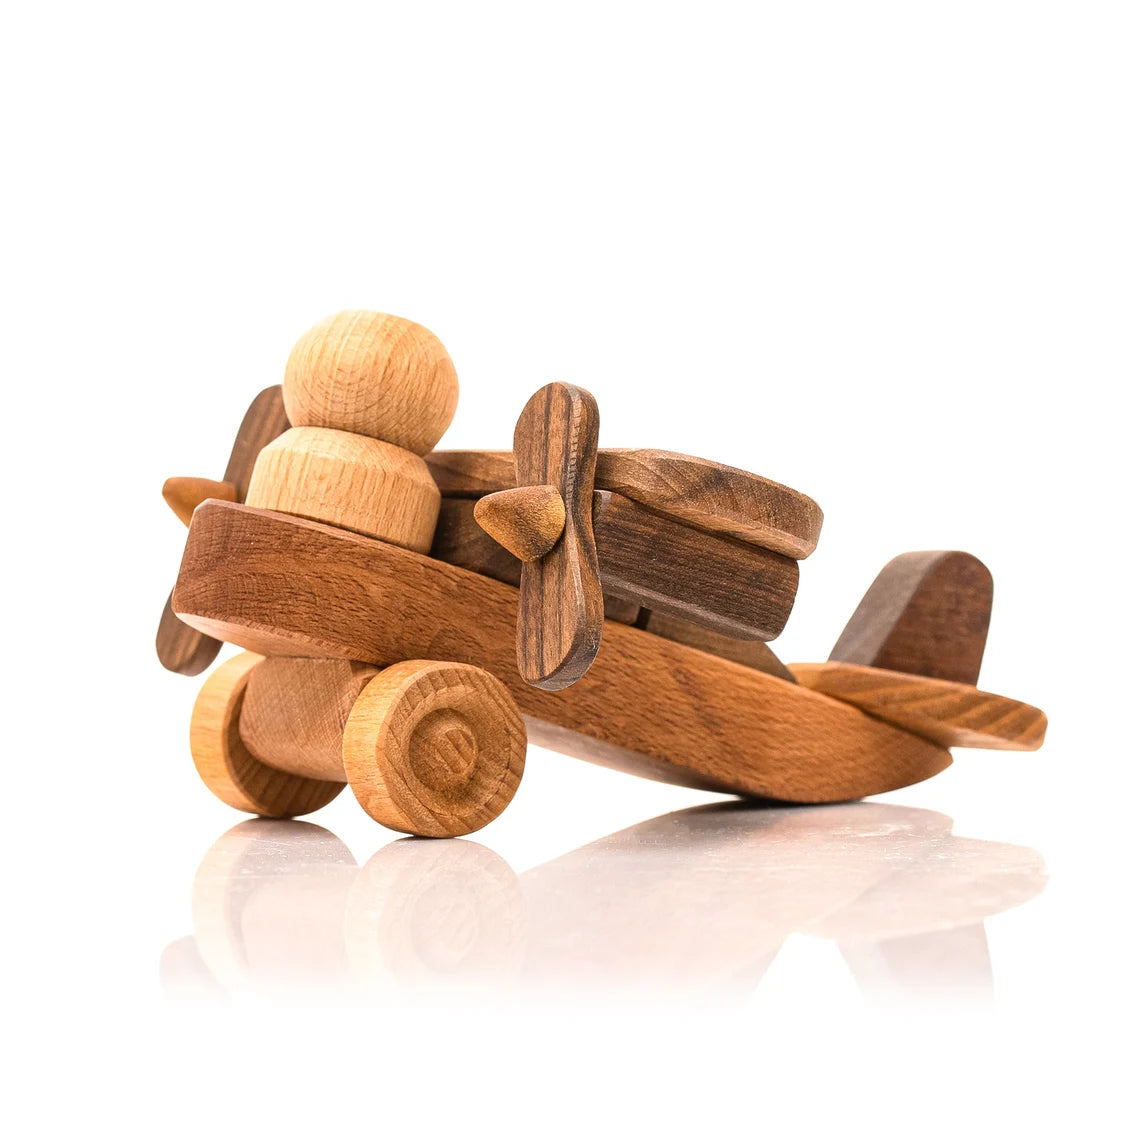 Personalized Wooden Toy Airplane, Wooden Airplane Toy, Wooden Toys